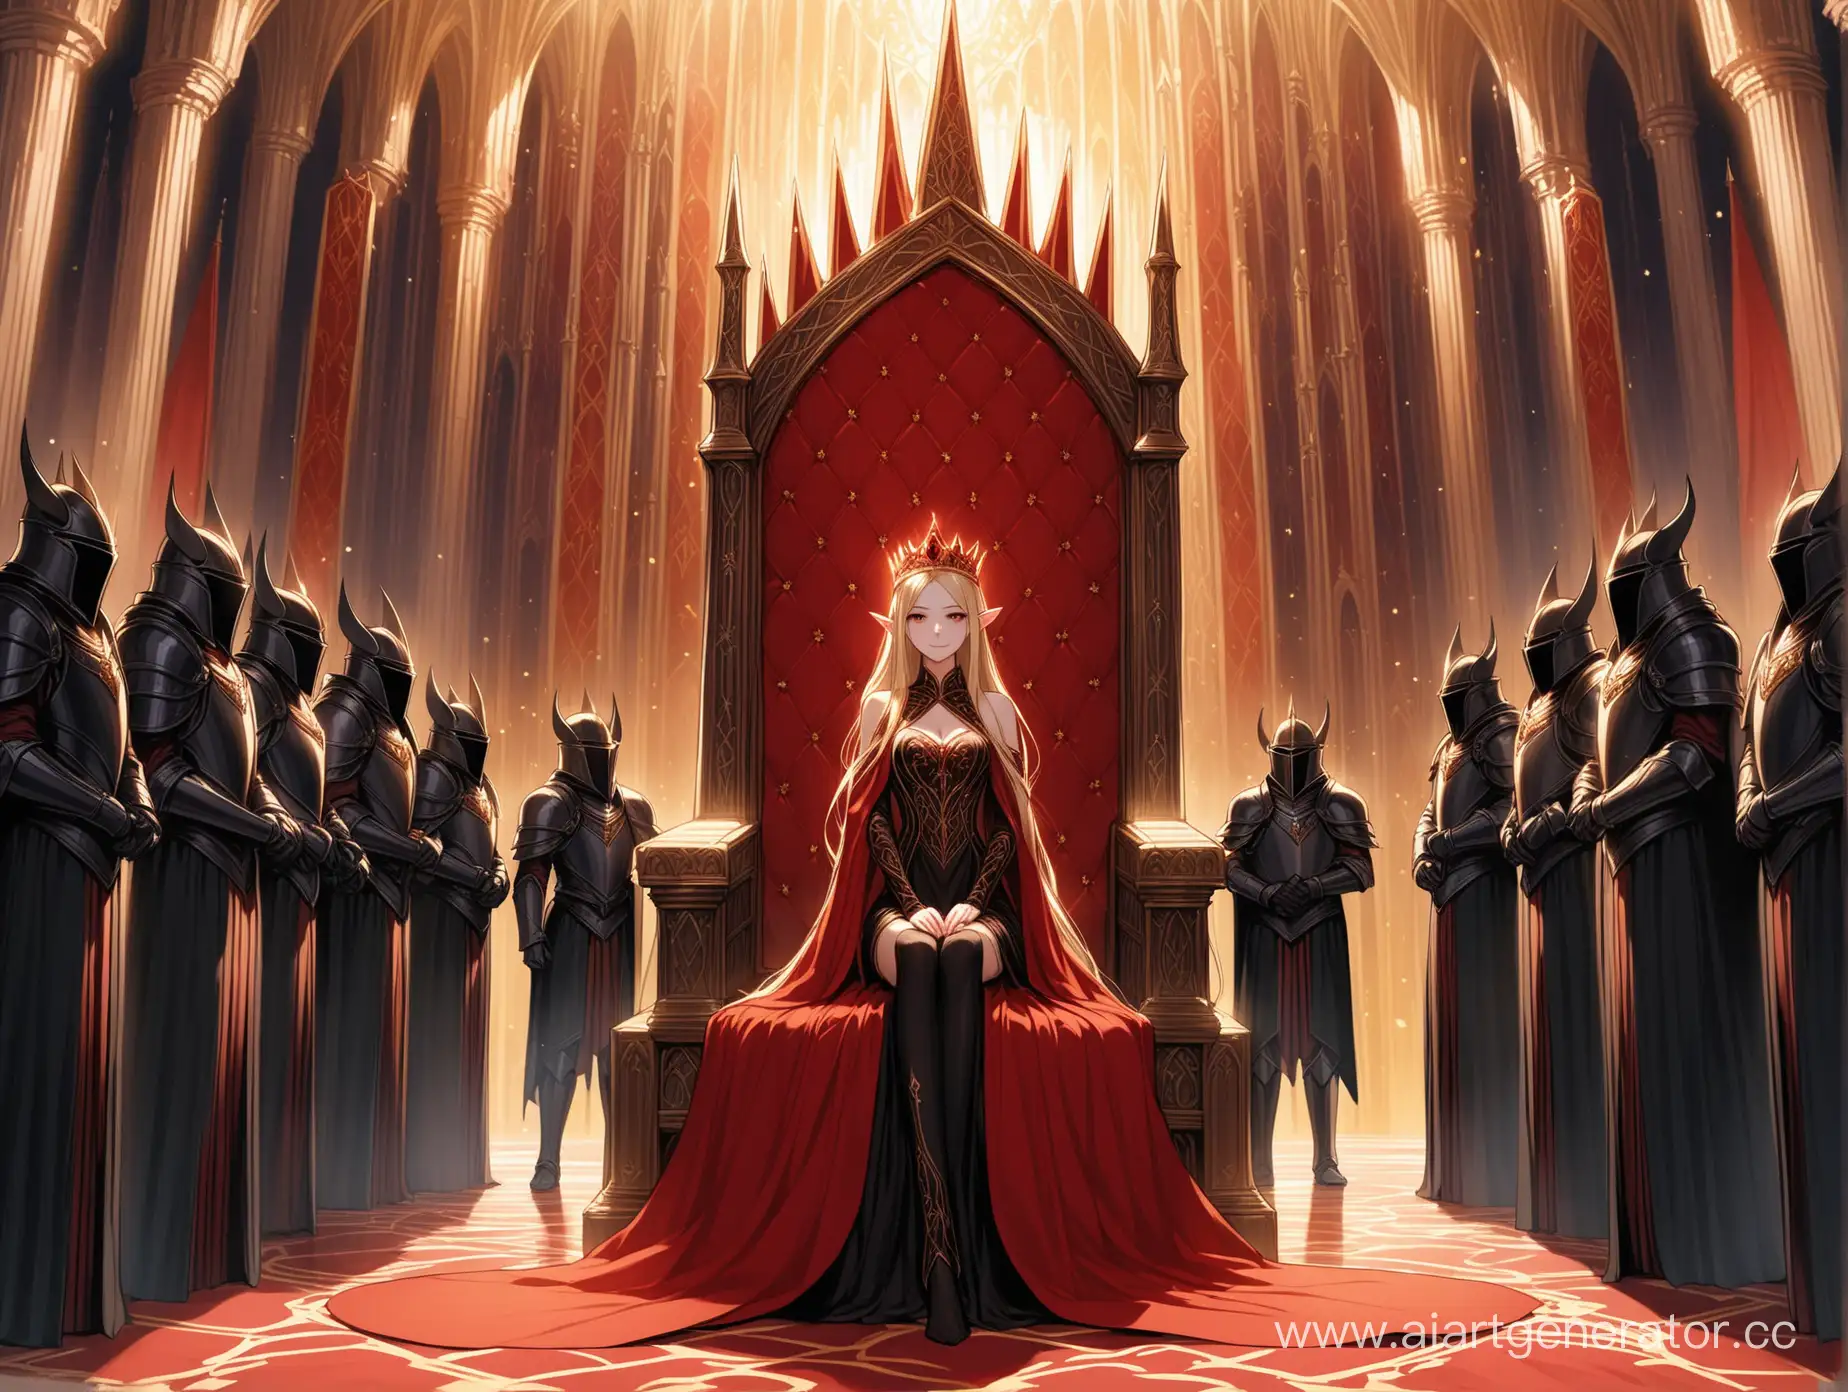 Elven-Queen-Reigns-Surrounded-by-Subjects-and-Knights-in-Throne-Room